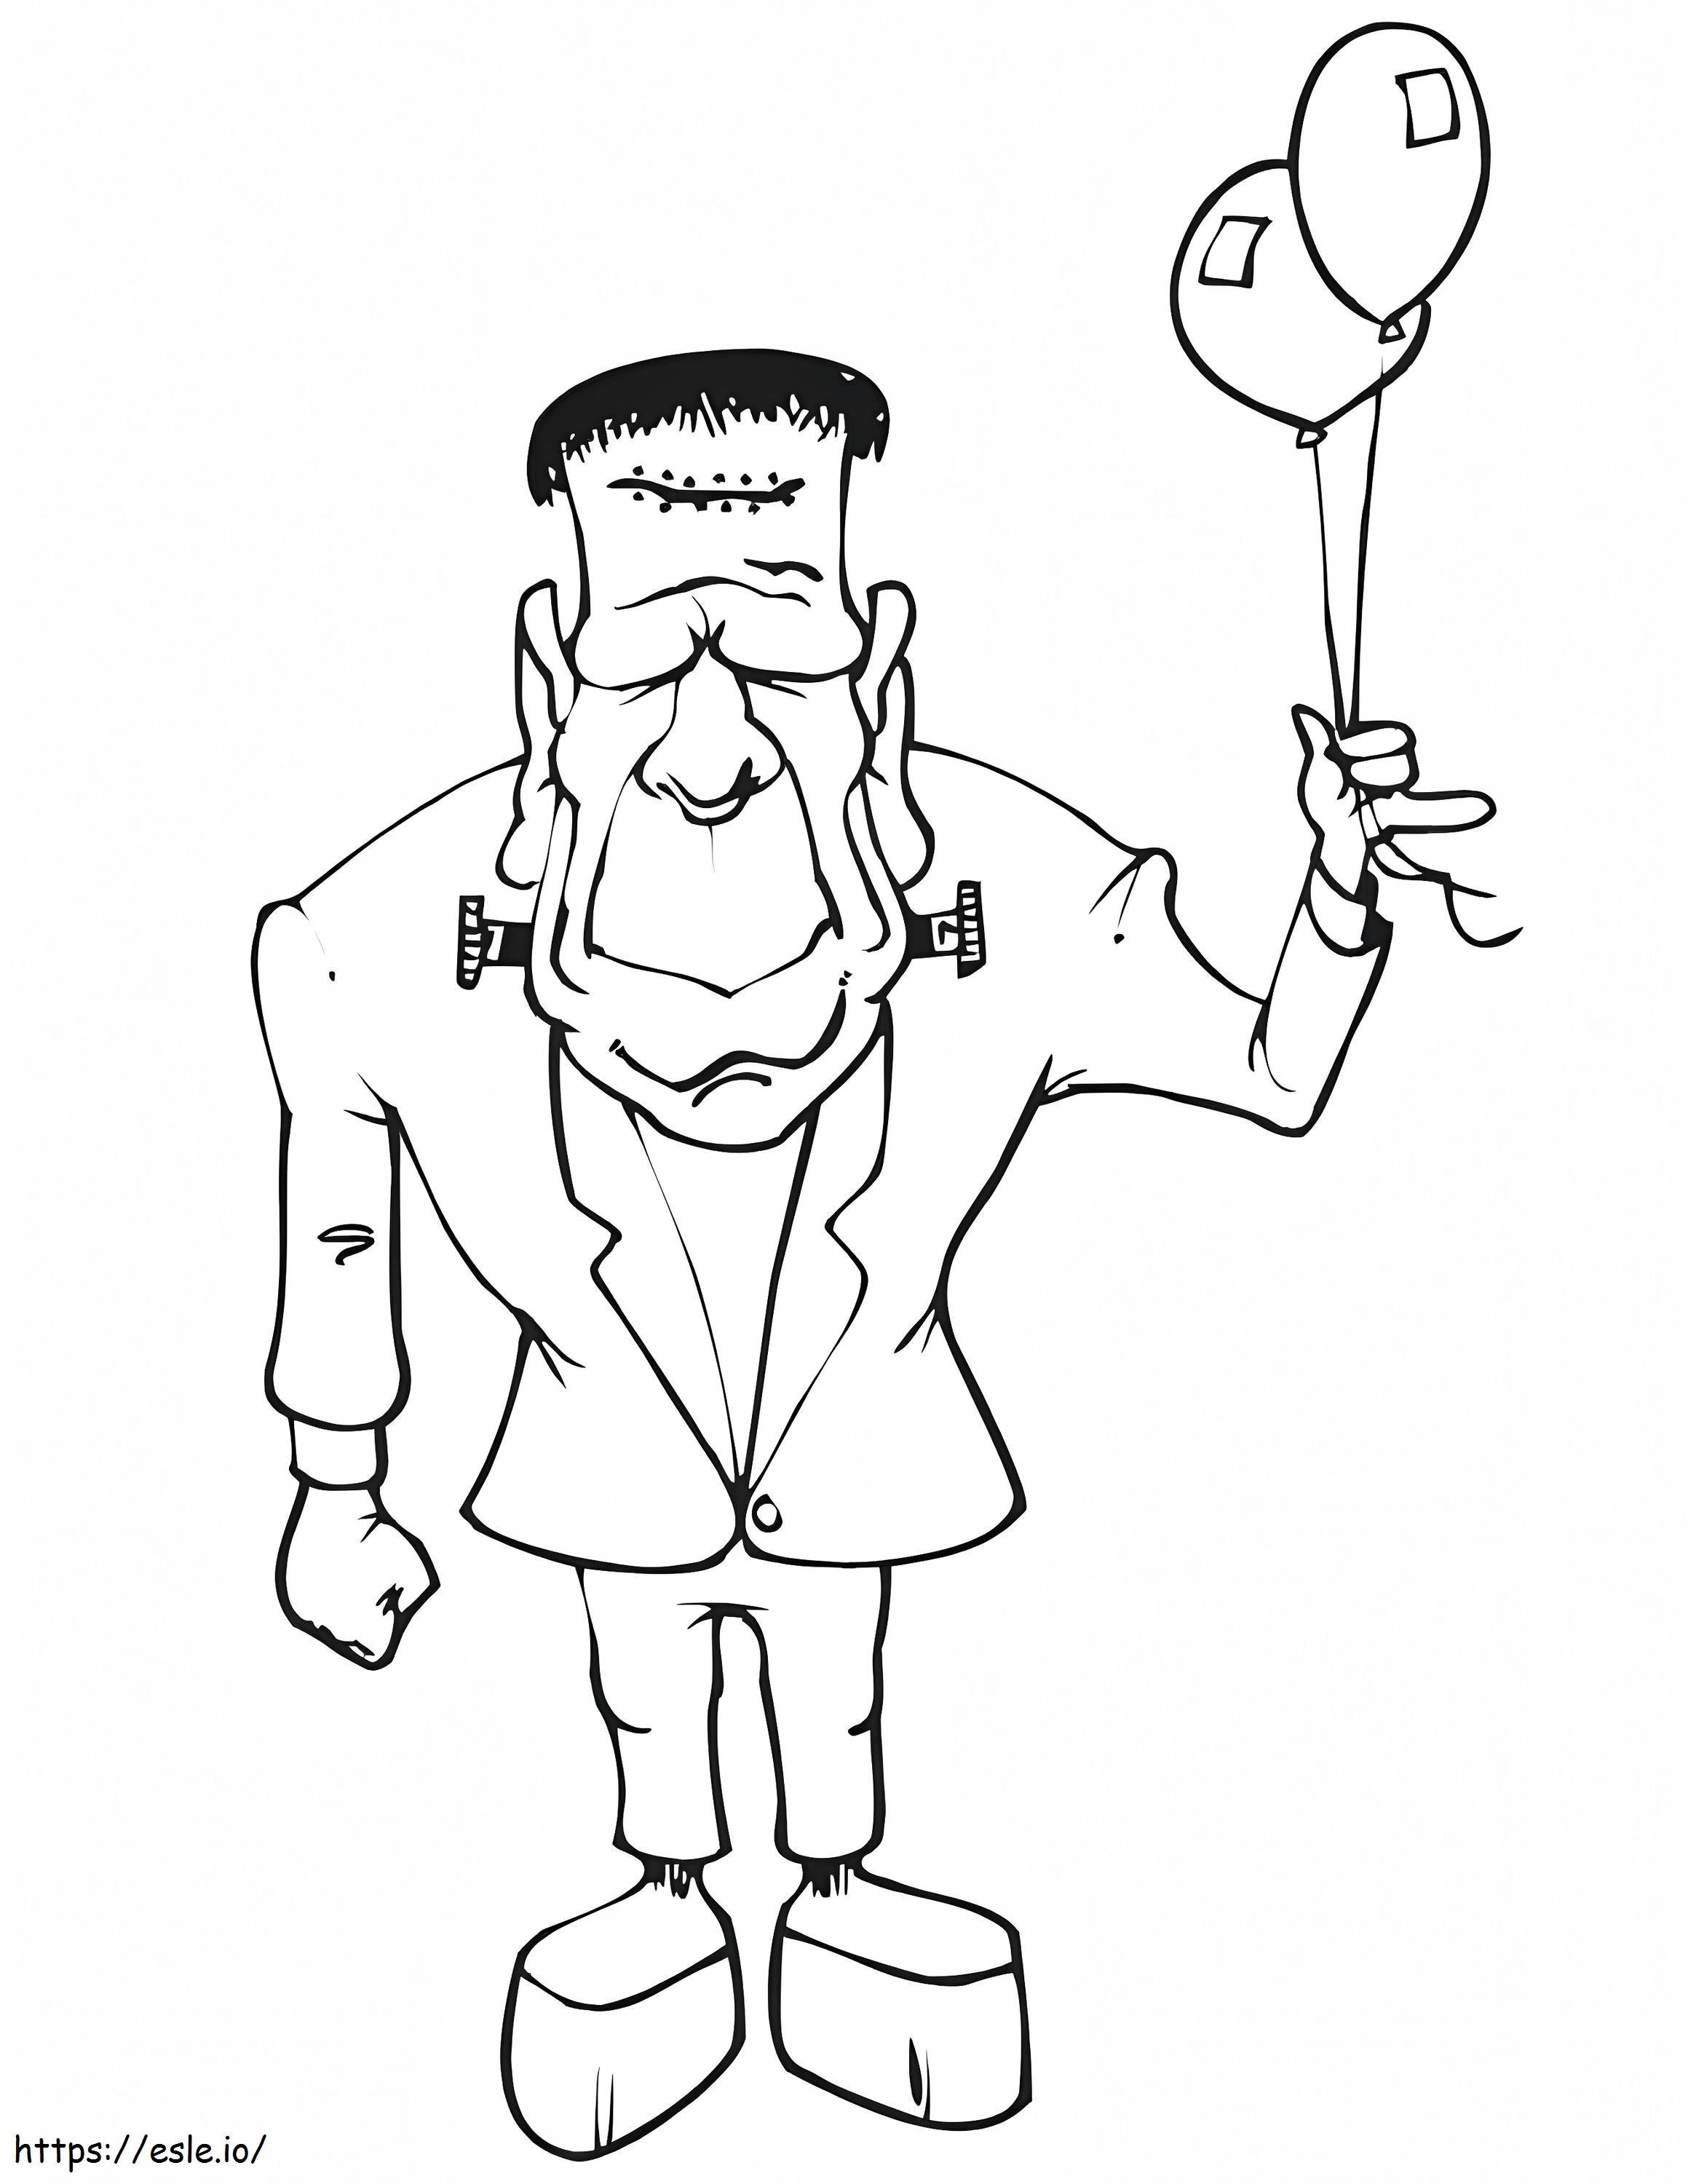 1539678978 Frankenstein With Balloons coloring page